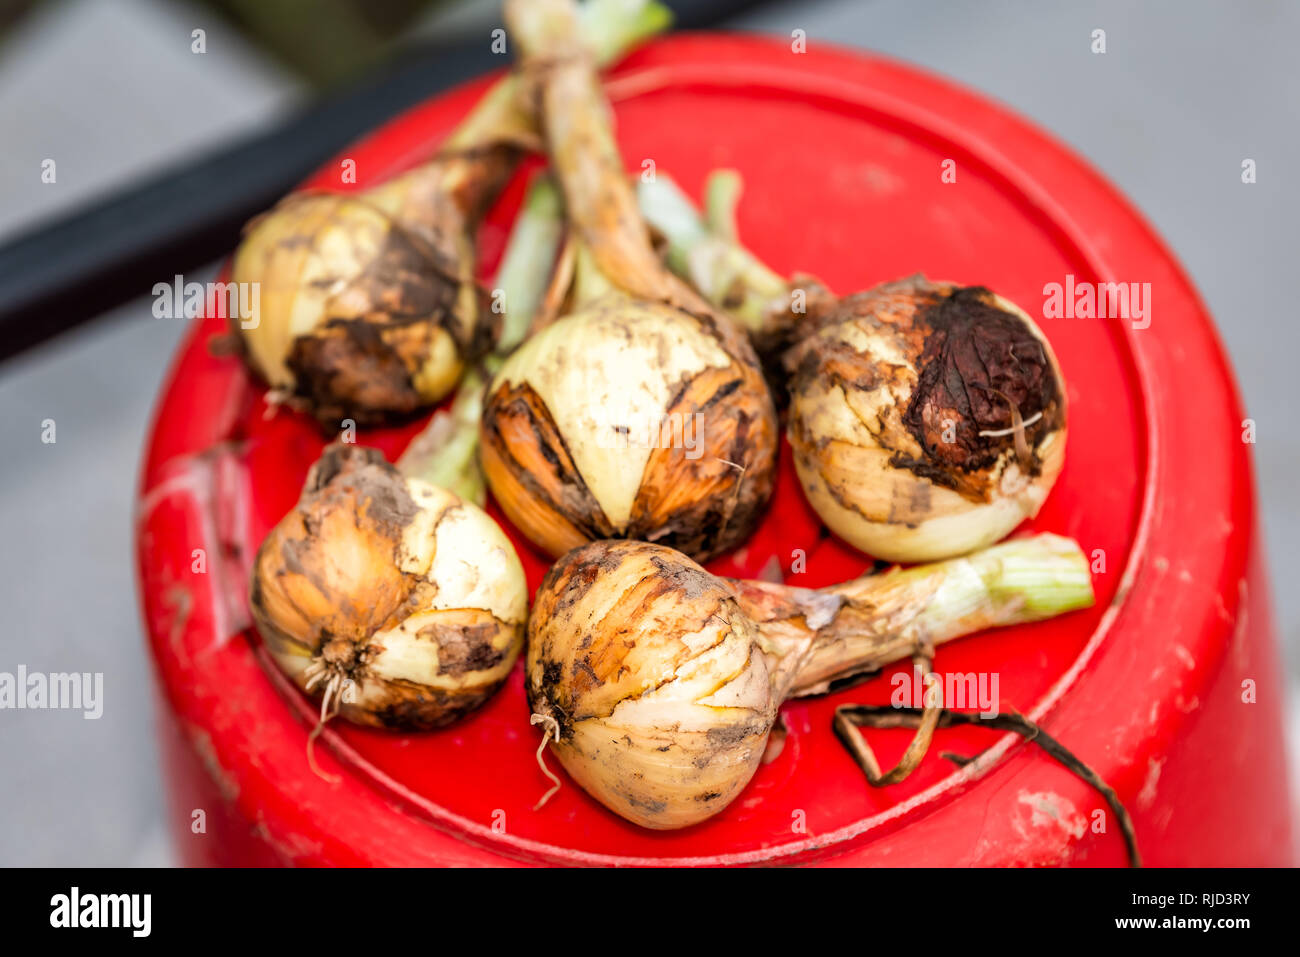 Closeup of many bulb onions with soil dirt unpeeled homegrown garden produce with stems on red bucket in Ukraine or Russia dacha country rustic home h Stock Photo